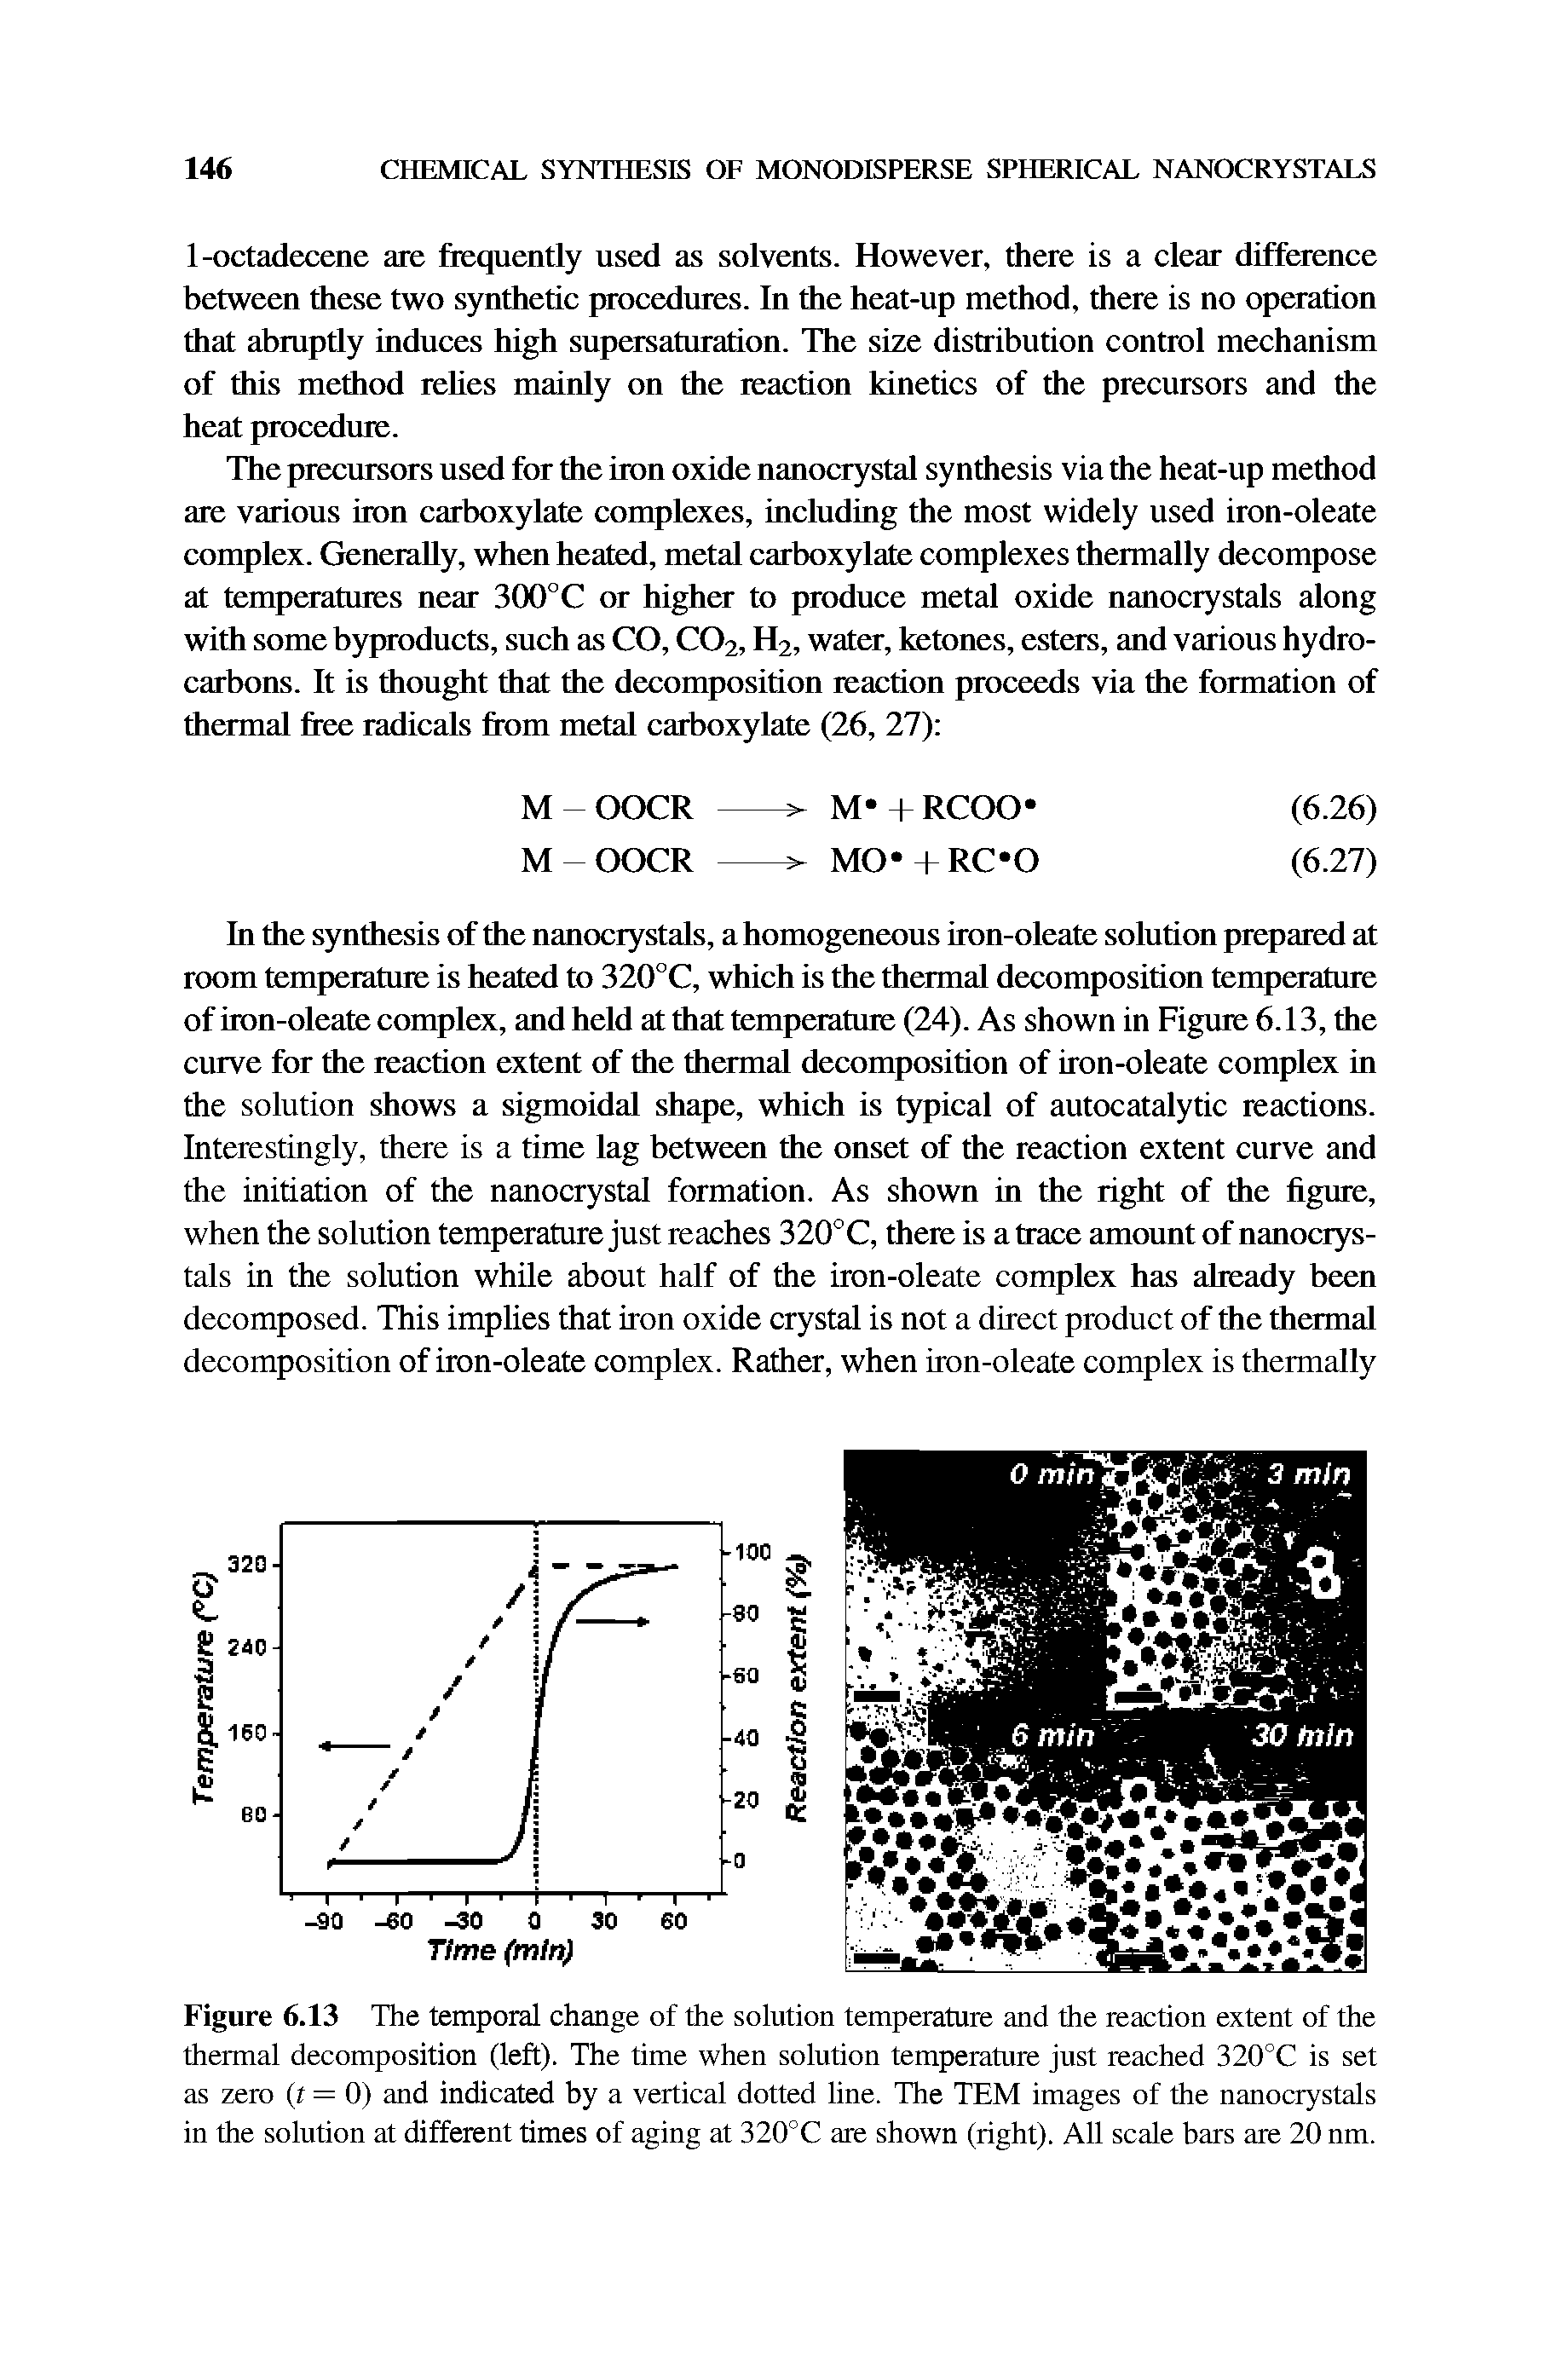 Figure 6.13 The temporal change of the solution temperature and the reaction extent of the thermal decomposition (left). The time when solution temperature just reached 320°C is set as zero (t = 0) and indicated by a vertical dotted line. The TEM images of the nanocrystals in the solution at different times of aging at 320°C are shown (right). All scale bars are 20 nm.